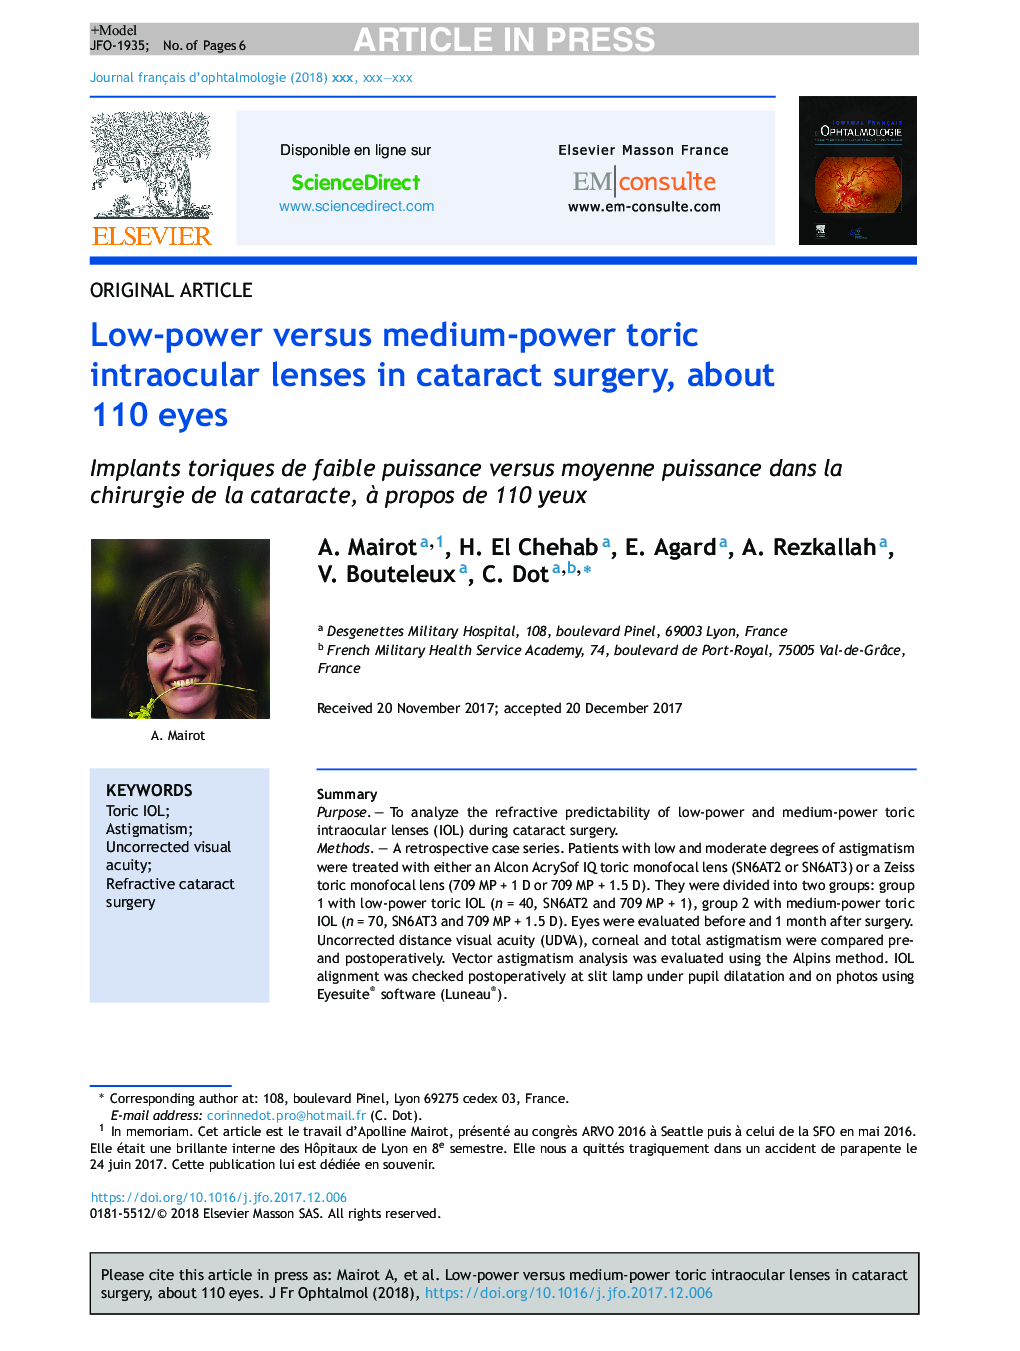 Low-power versus medium-power toric intraocular lenses in cataract surgery, about 110 eyes